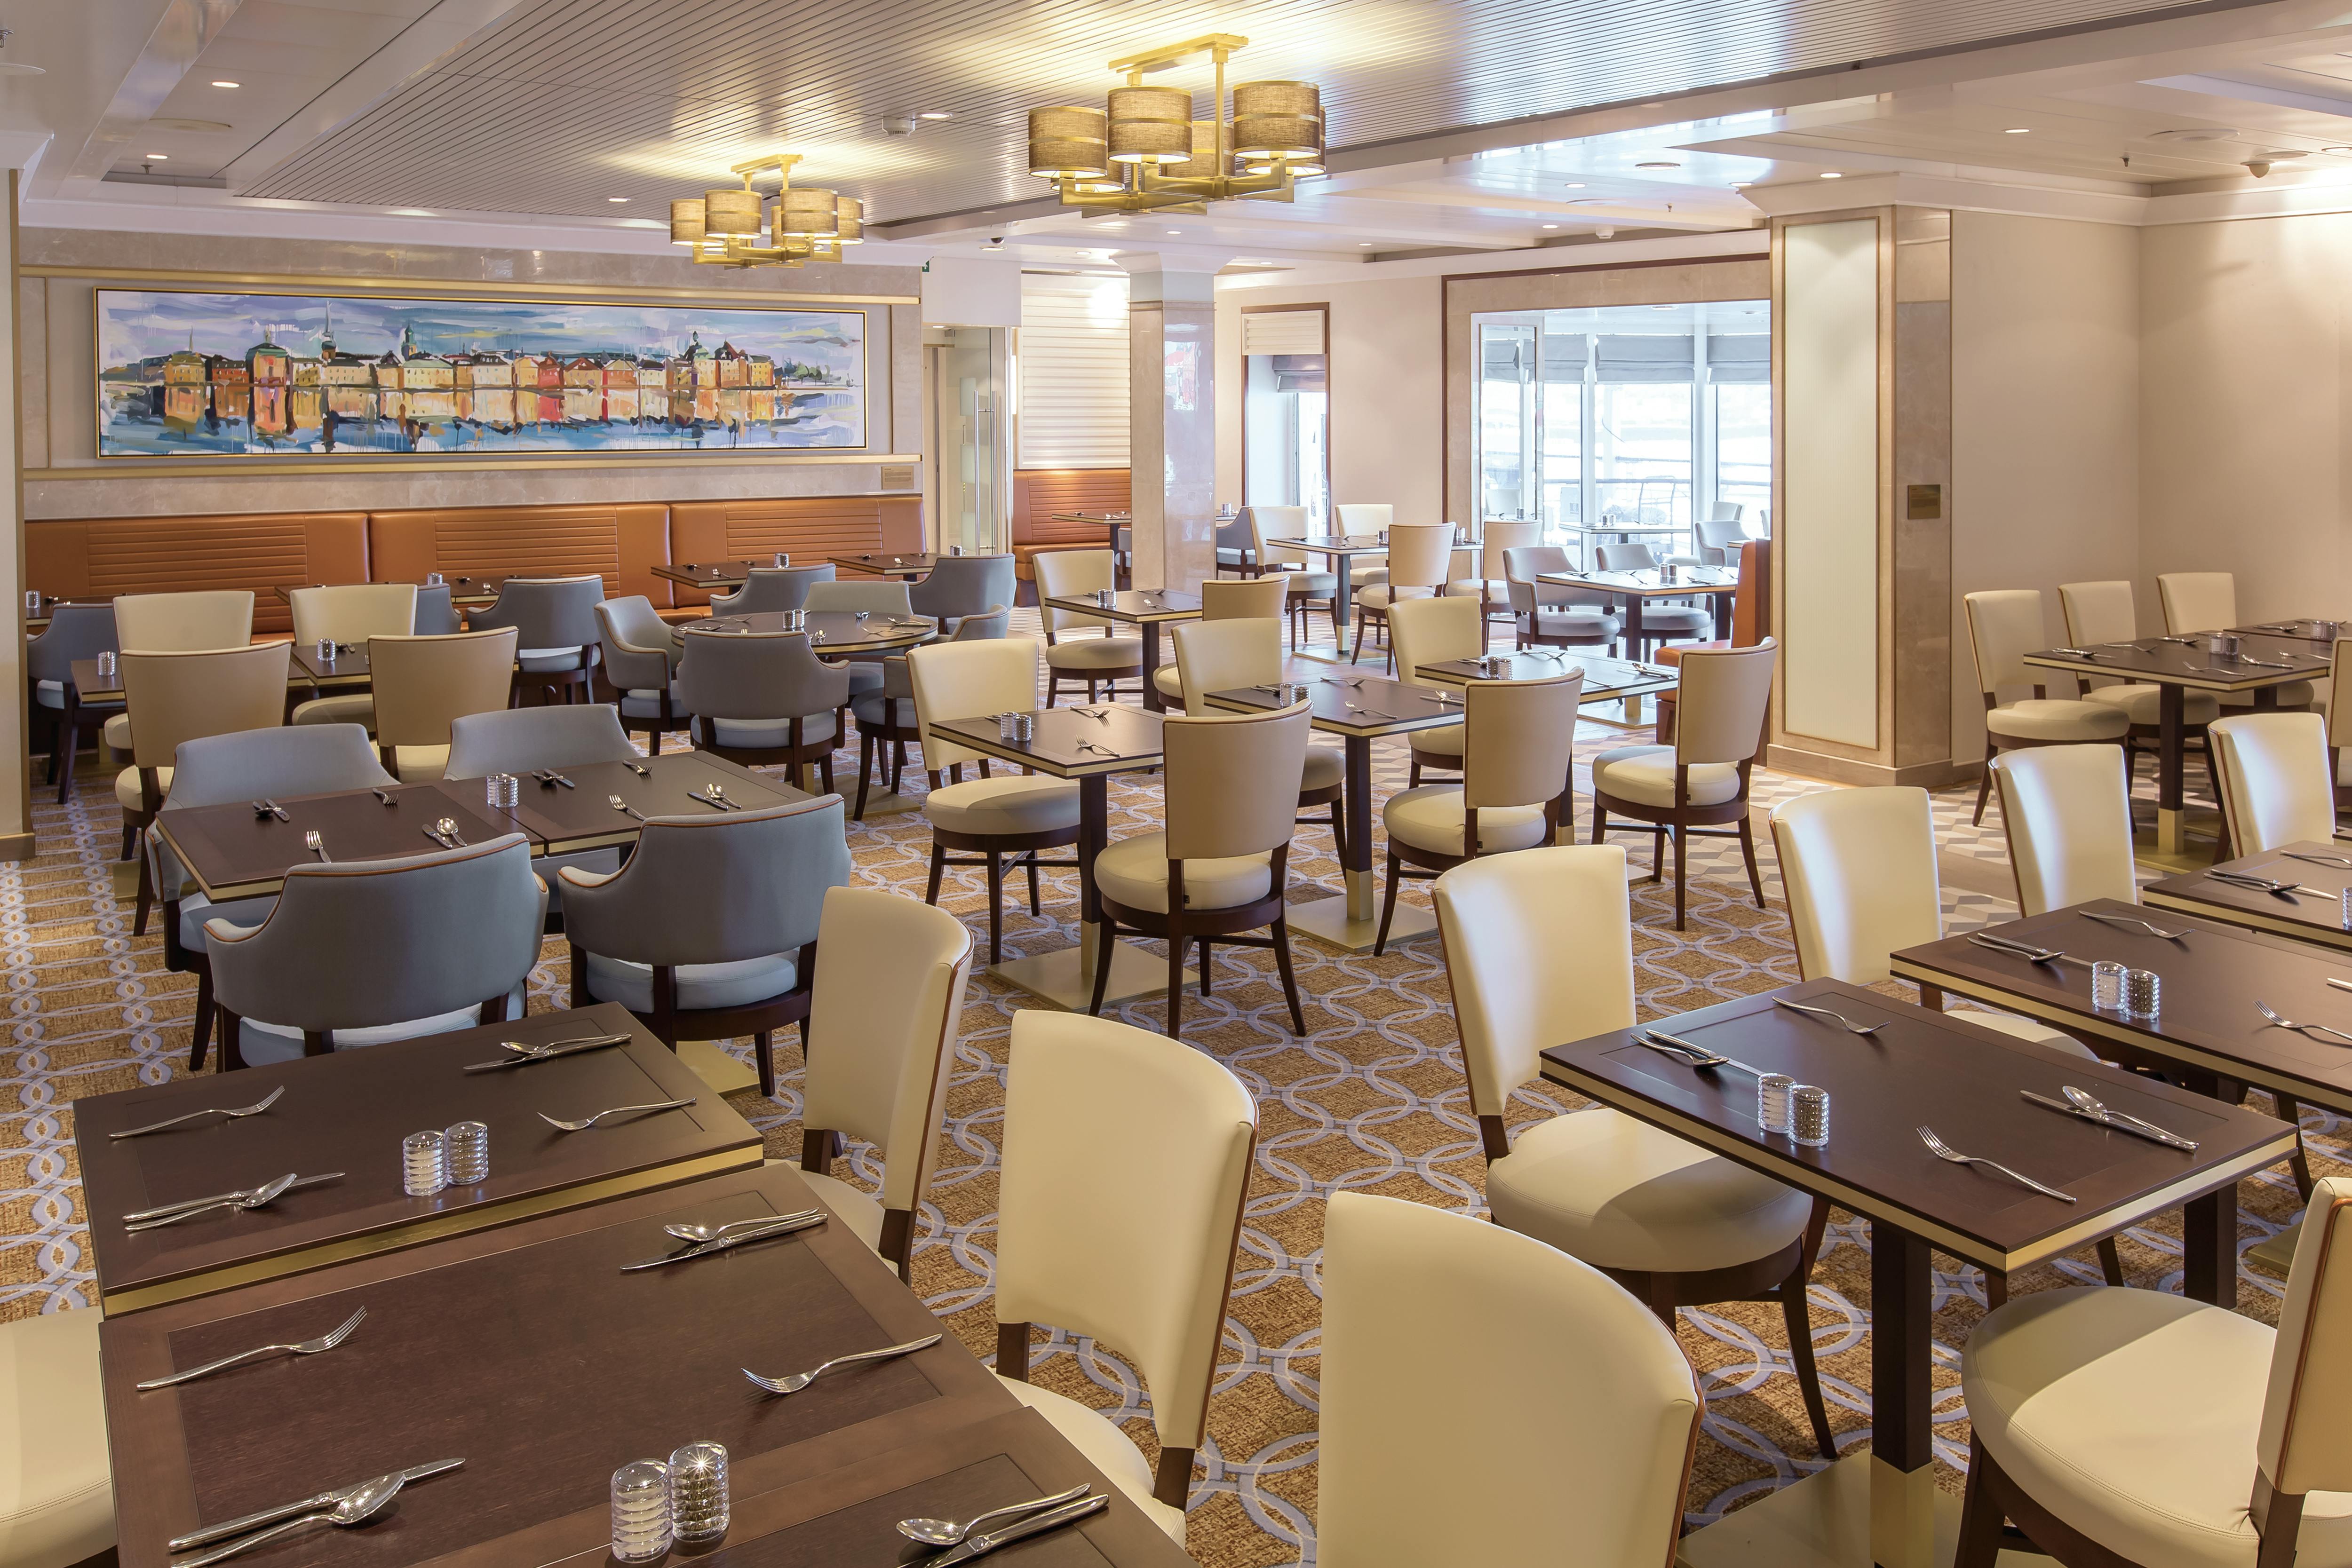 Queen Mary 2 Kings Court Dining